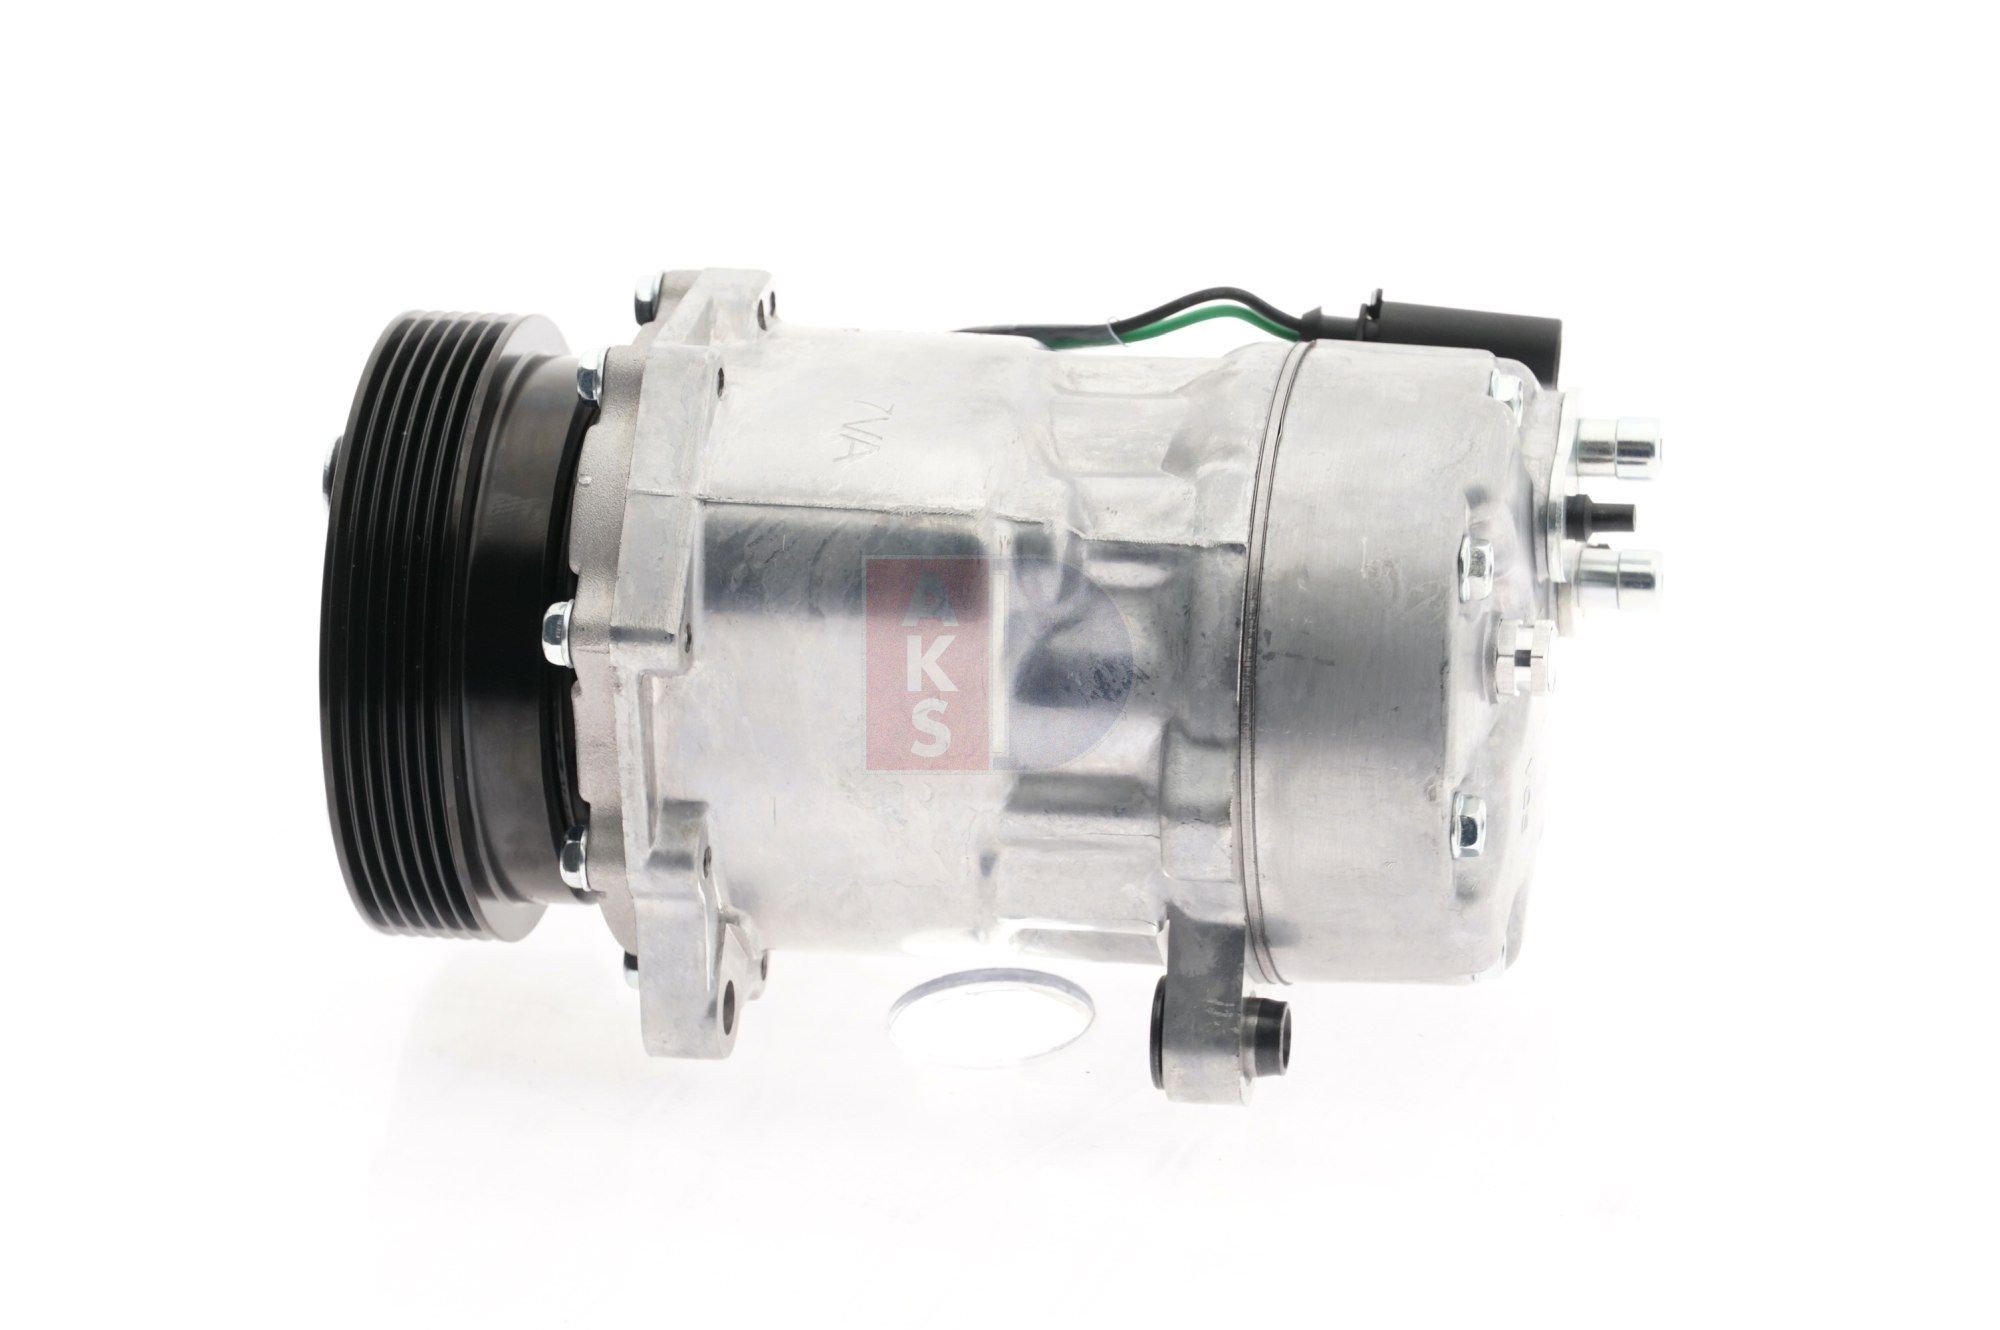 AKS DASIS 851770N Air conditioner compressor SD7V16, 12V, PAG 46, R 134a, with magnetic clutch